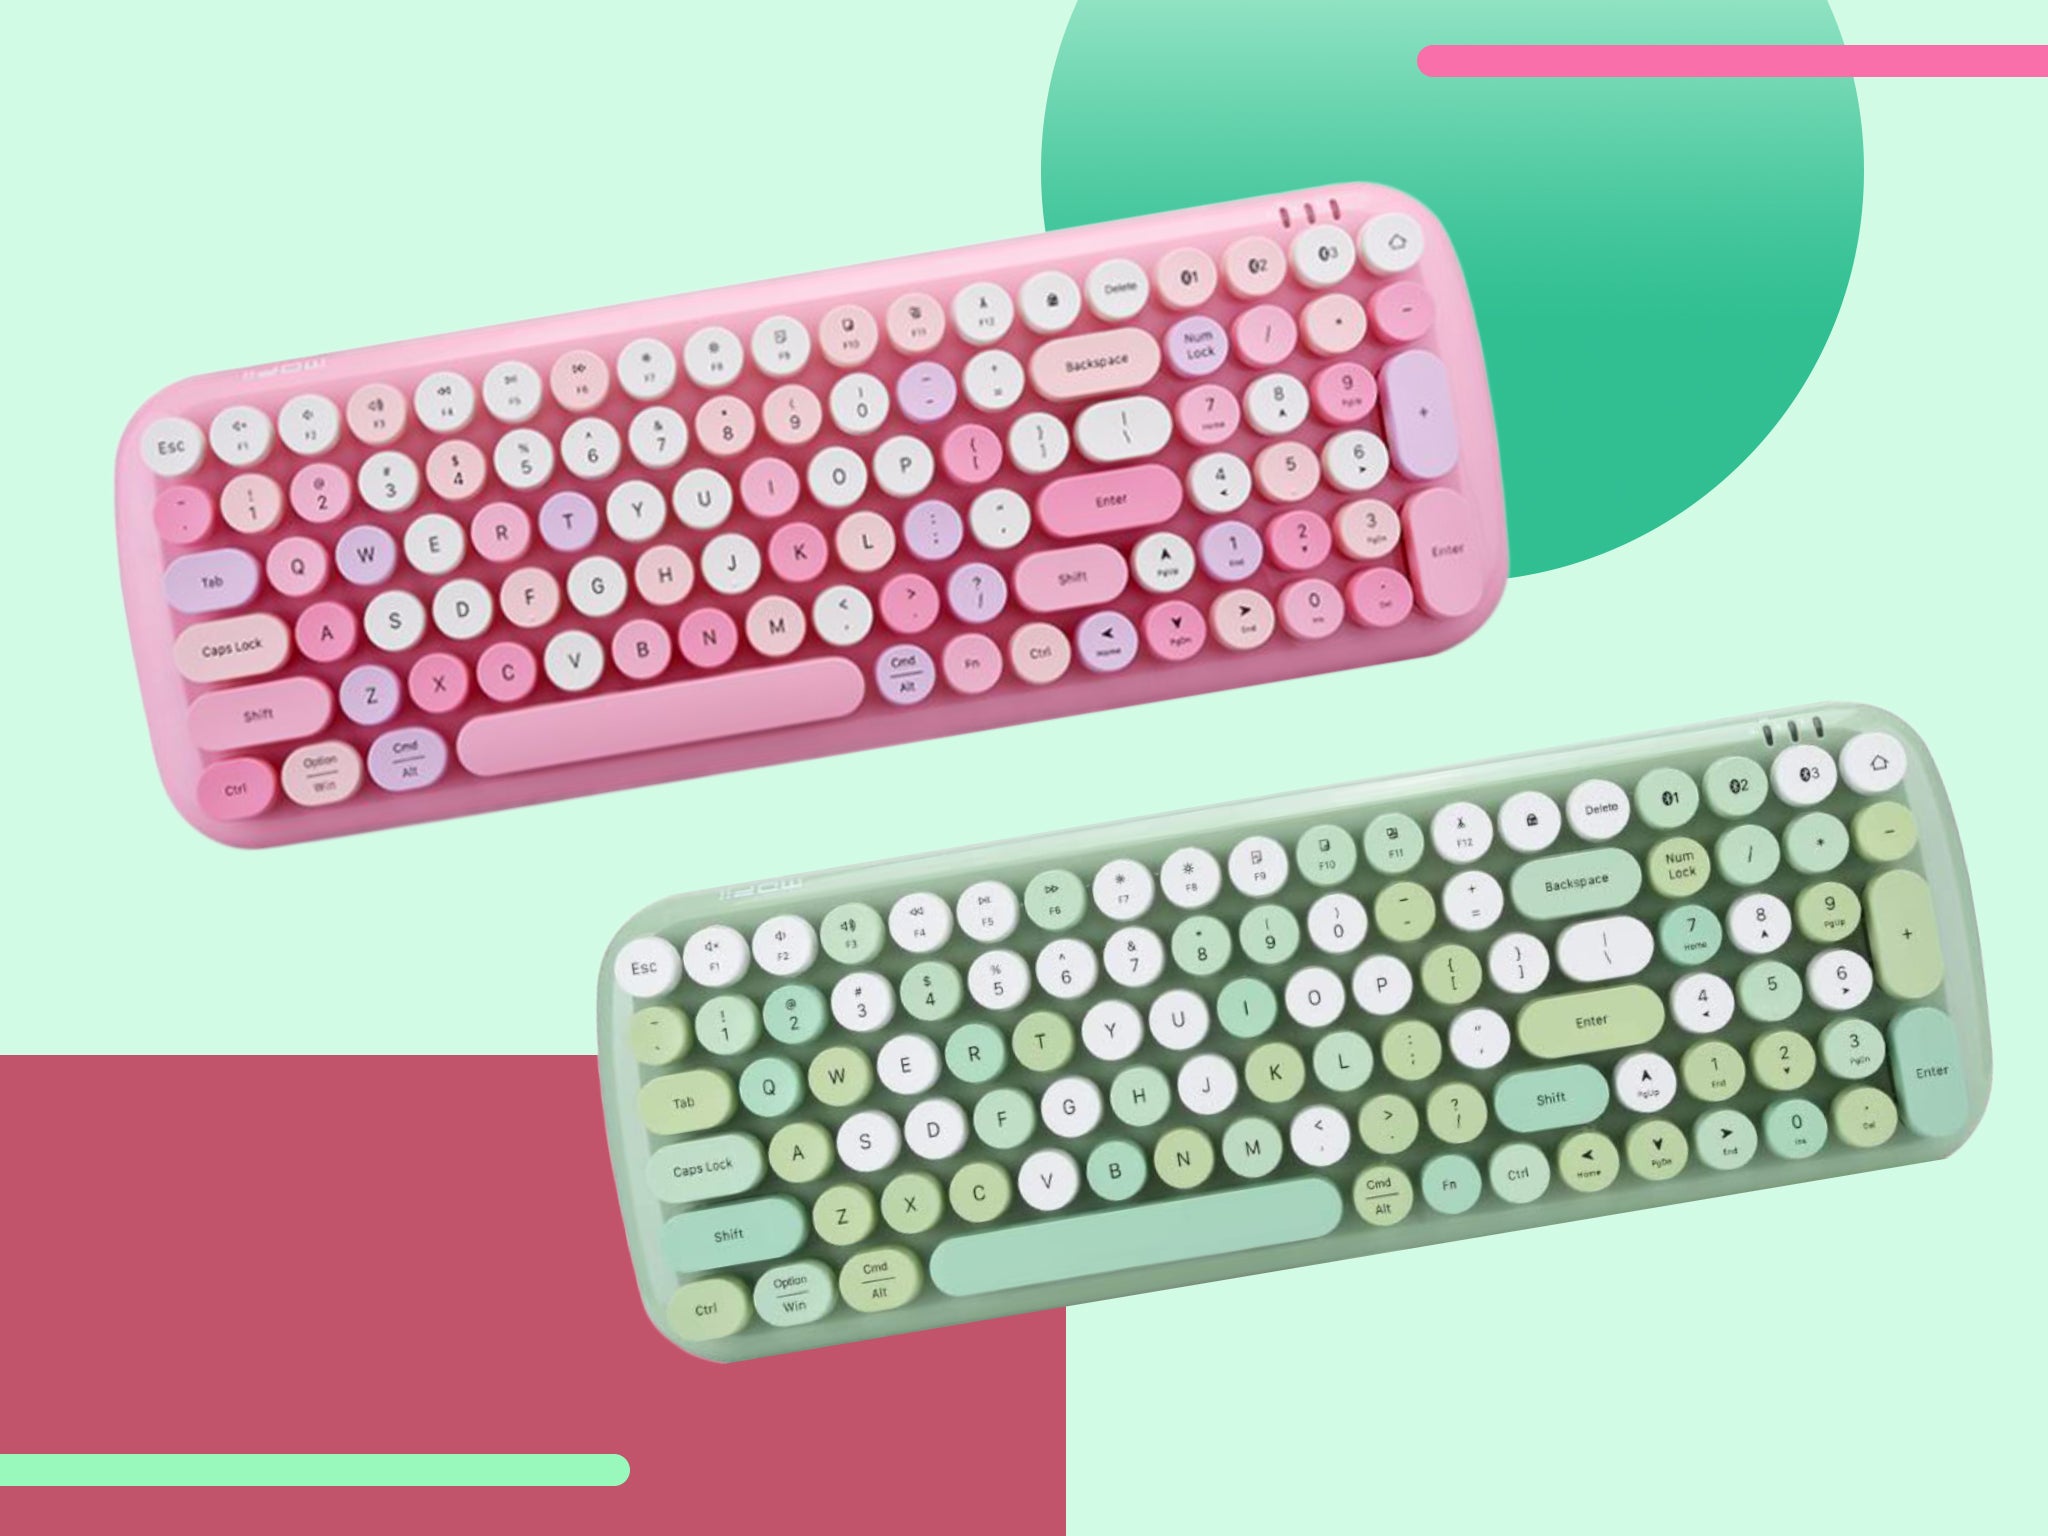 Colourful Keyboards Are Tiktoks Latest Trend Heres How To Buy One The Independent 8548